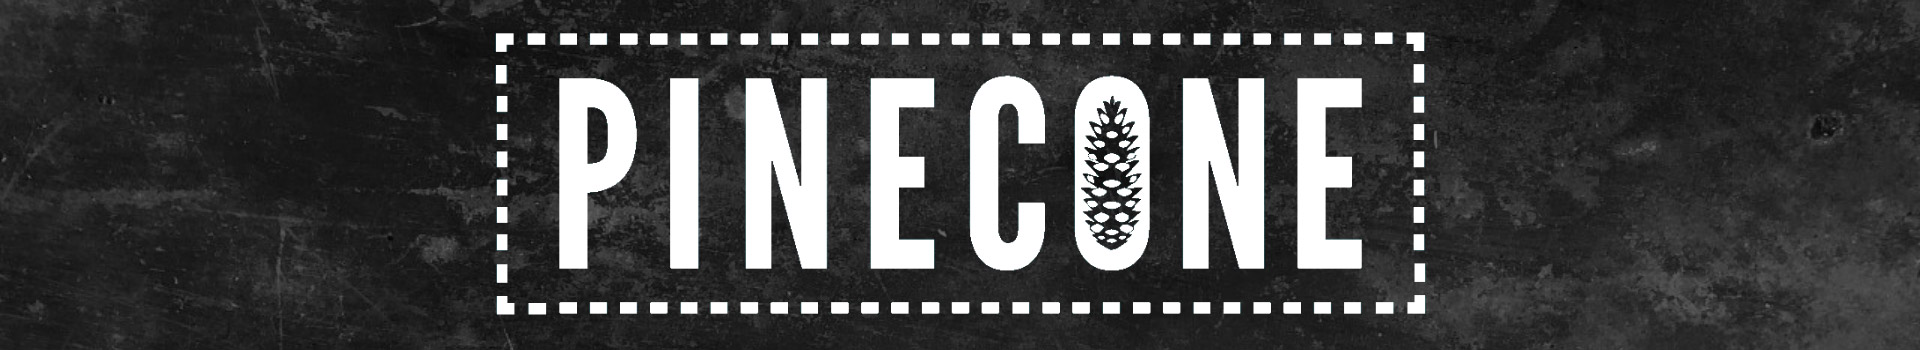 Pinecone Records - Official Merchandise